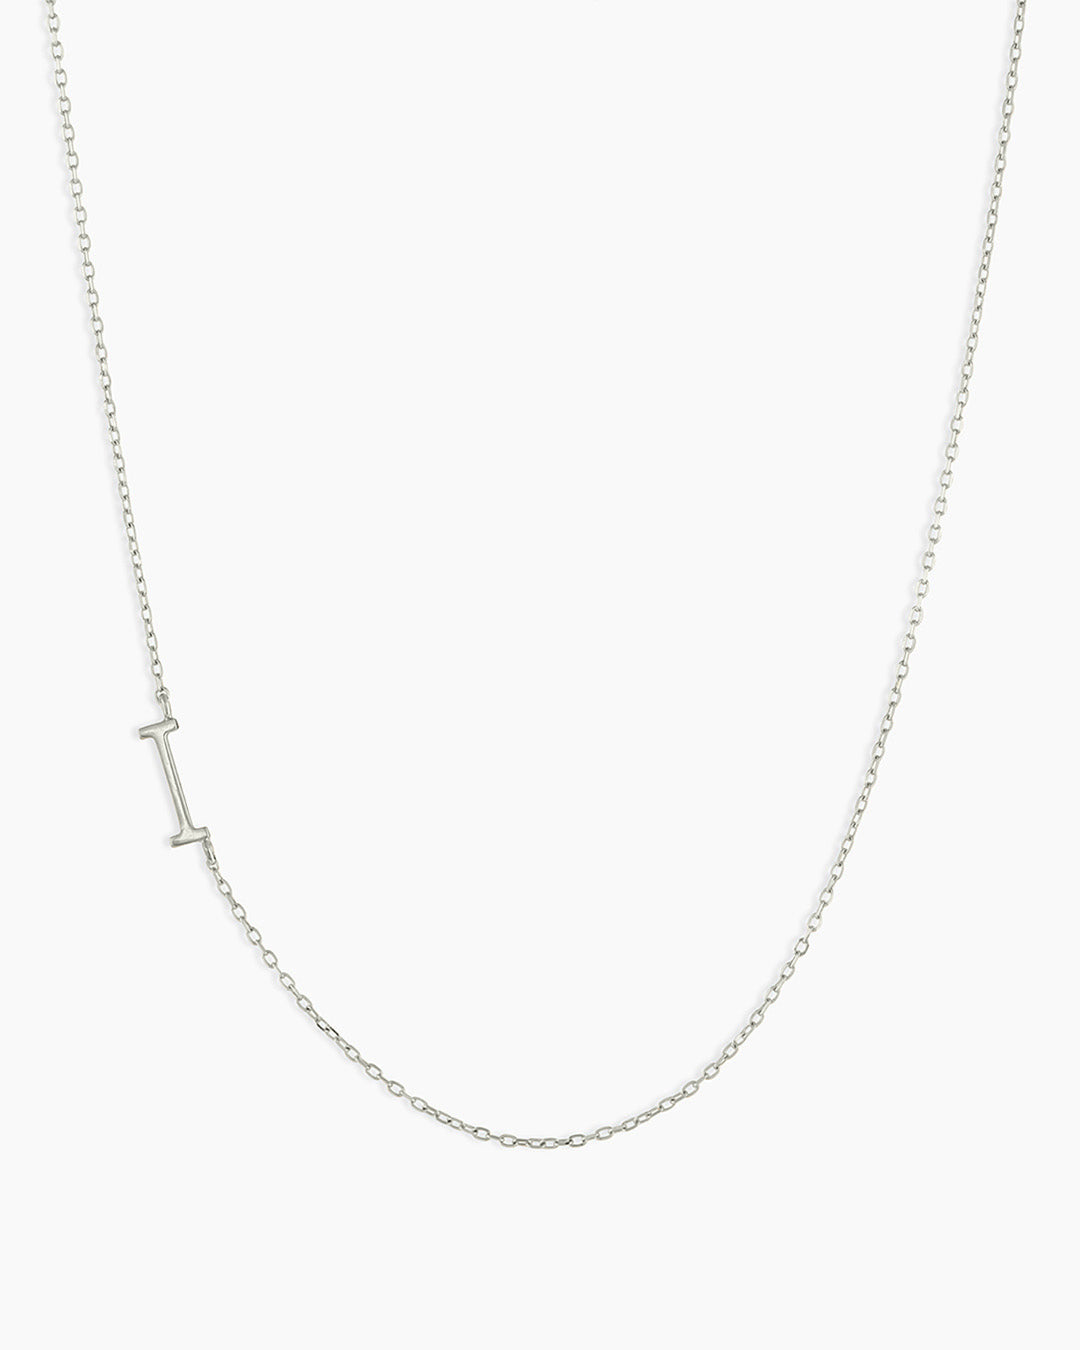 Woman wearing Alphabet Necklace || option::14k Solid White Gold, I